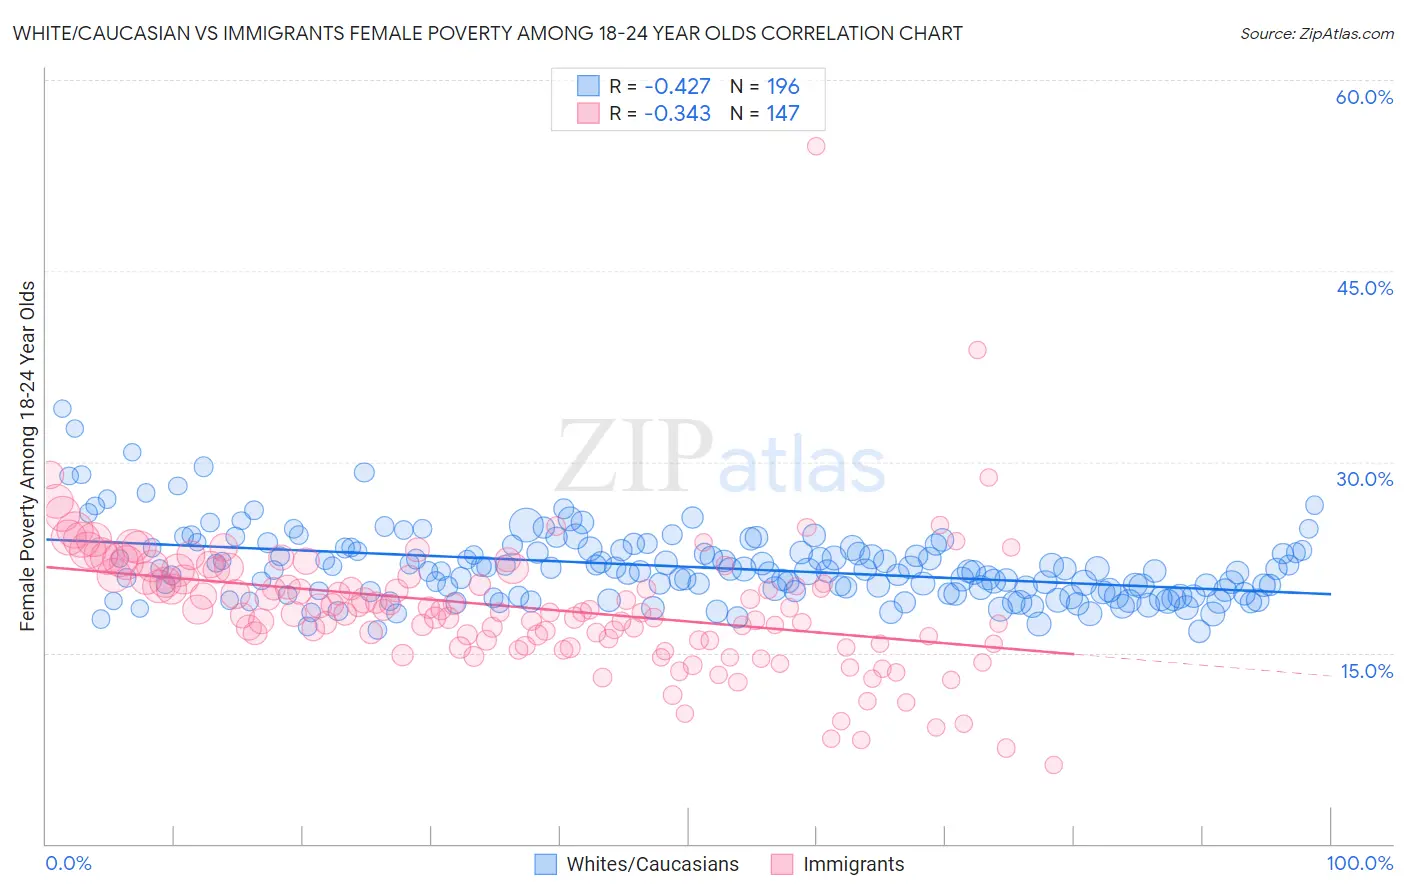 White/Caucasian vs Immigrants Female Poverty Among 18-24 Year Olds